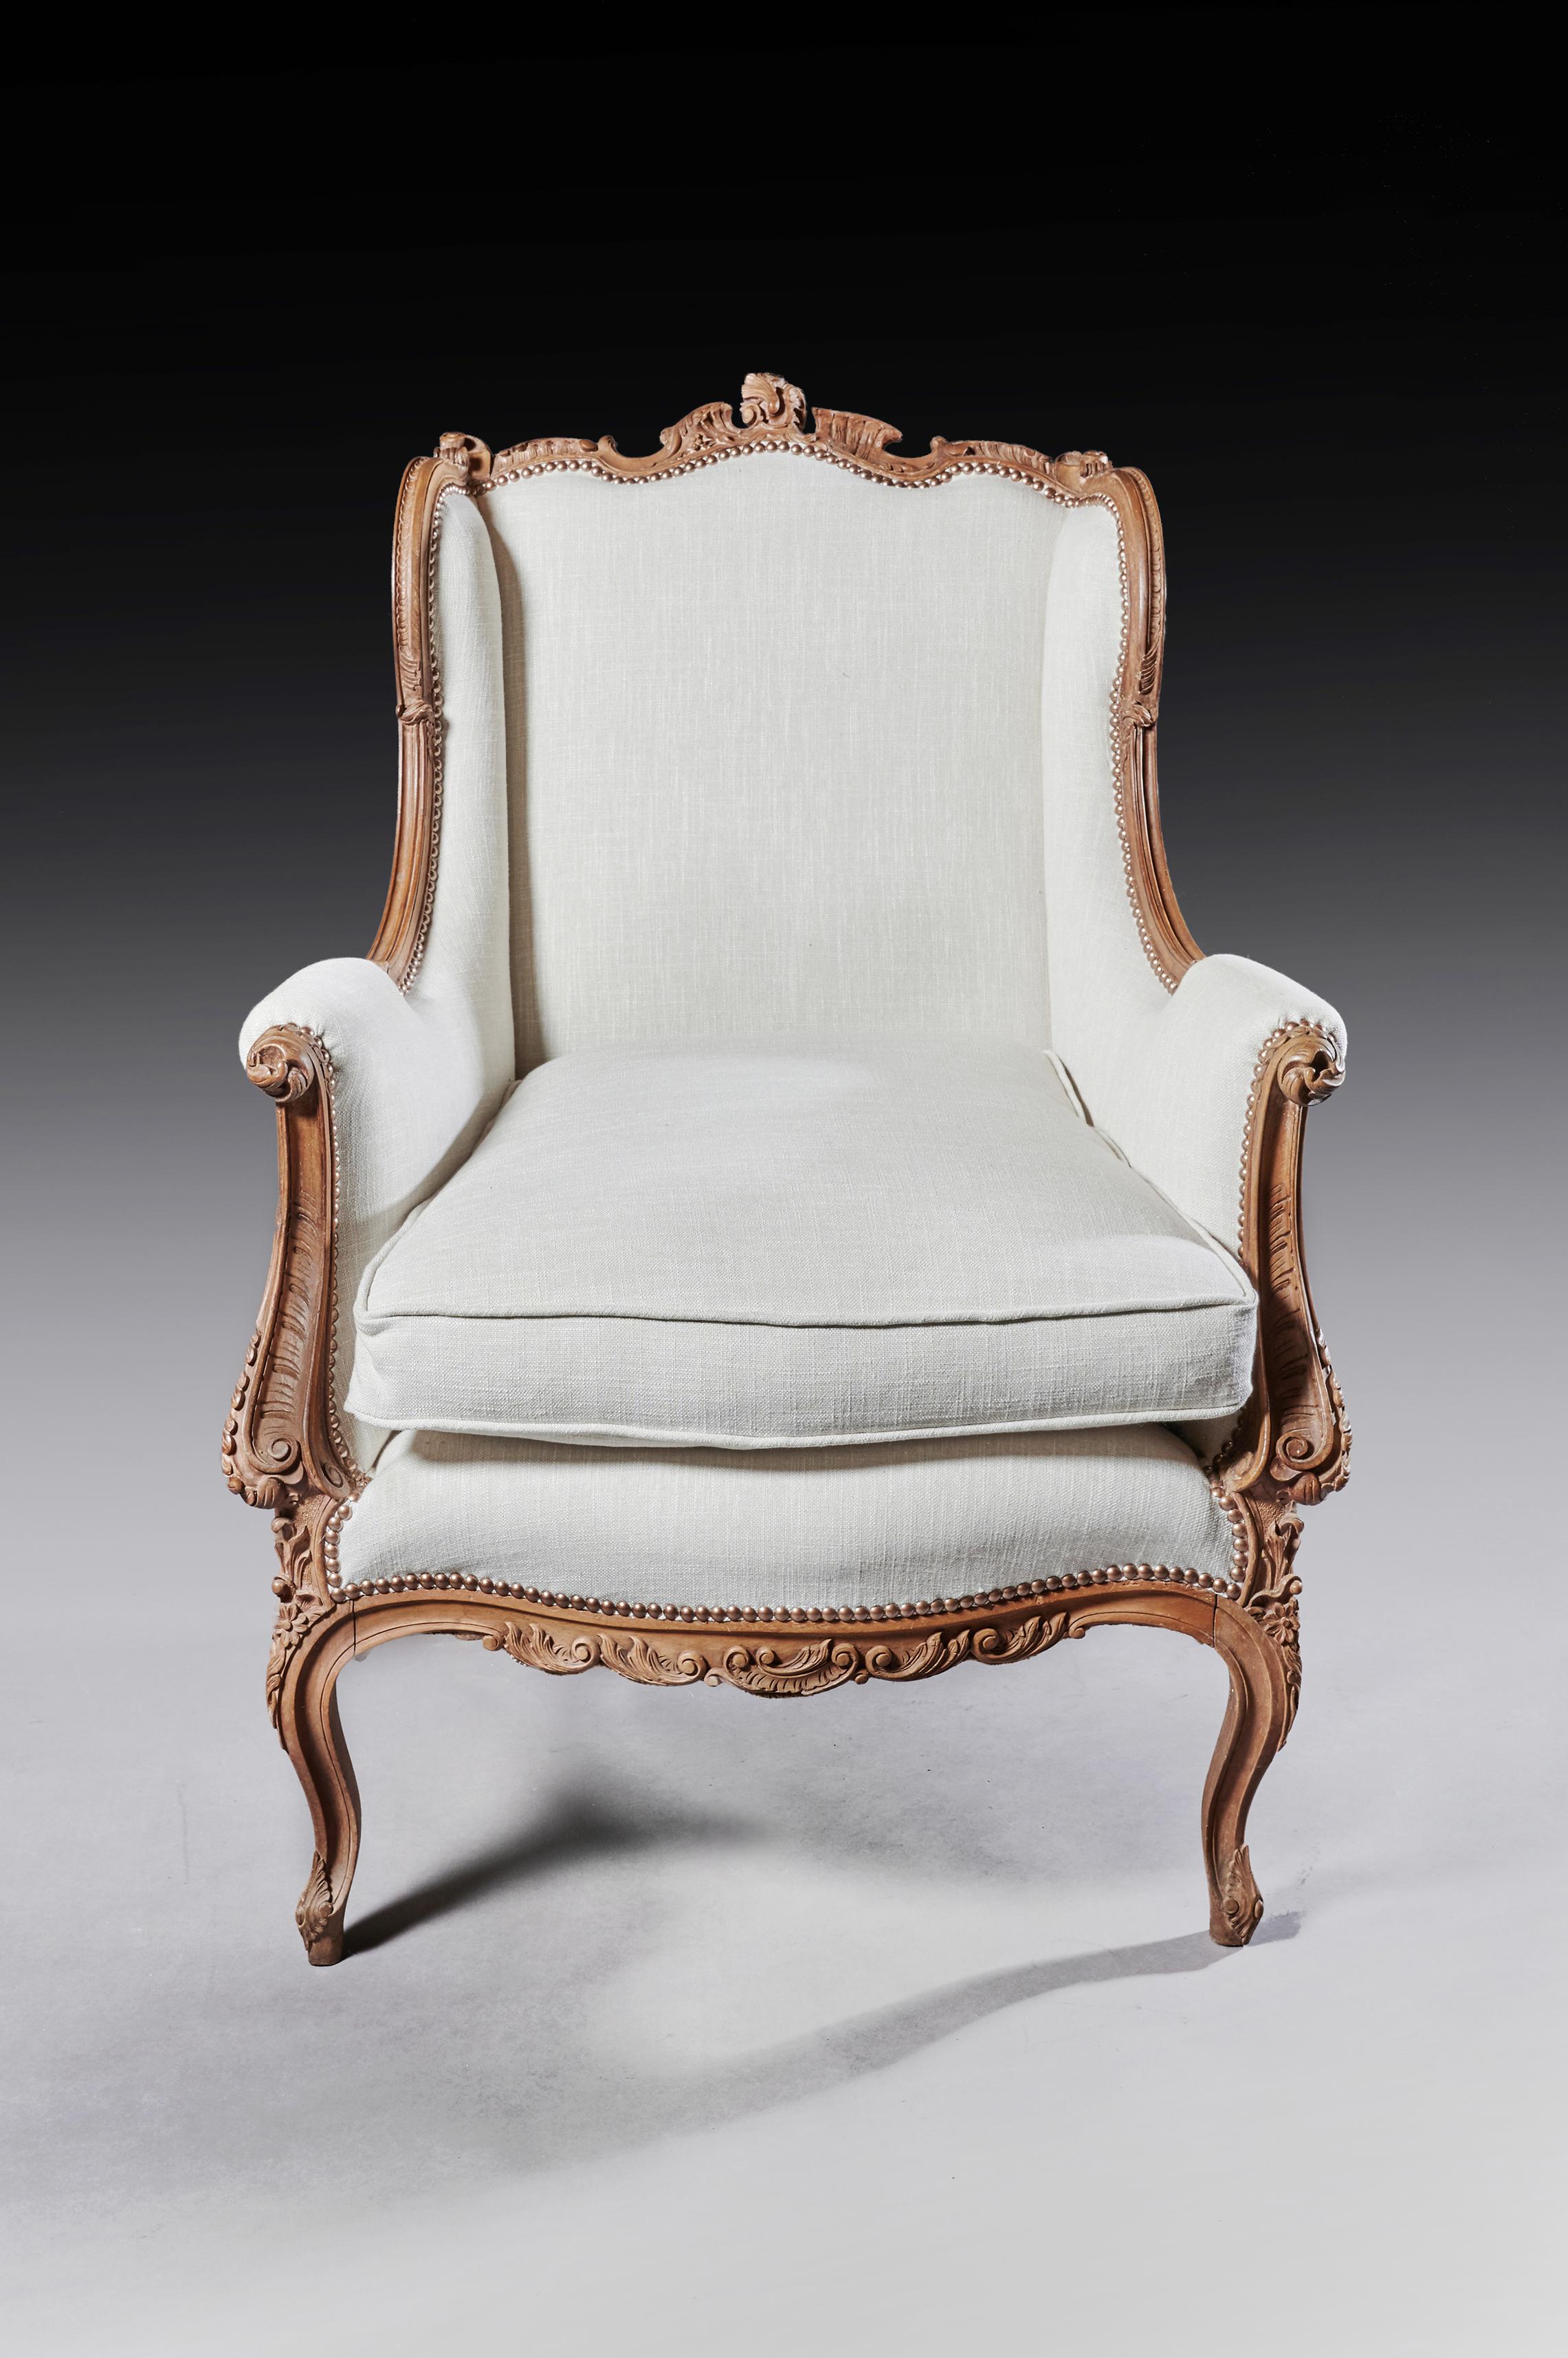 A finely carved 19th century French Louis XV style wingback armchair upholstered in linen.

French, circa 1870.

A decorative and well carved solid walnut wing back armchair having a shaped back with winged show wood sides falling to scrolled